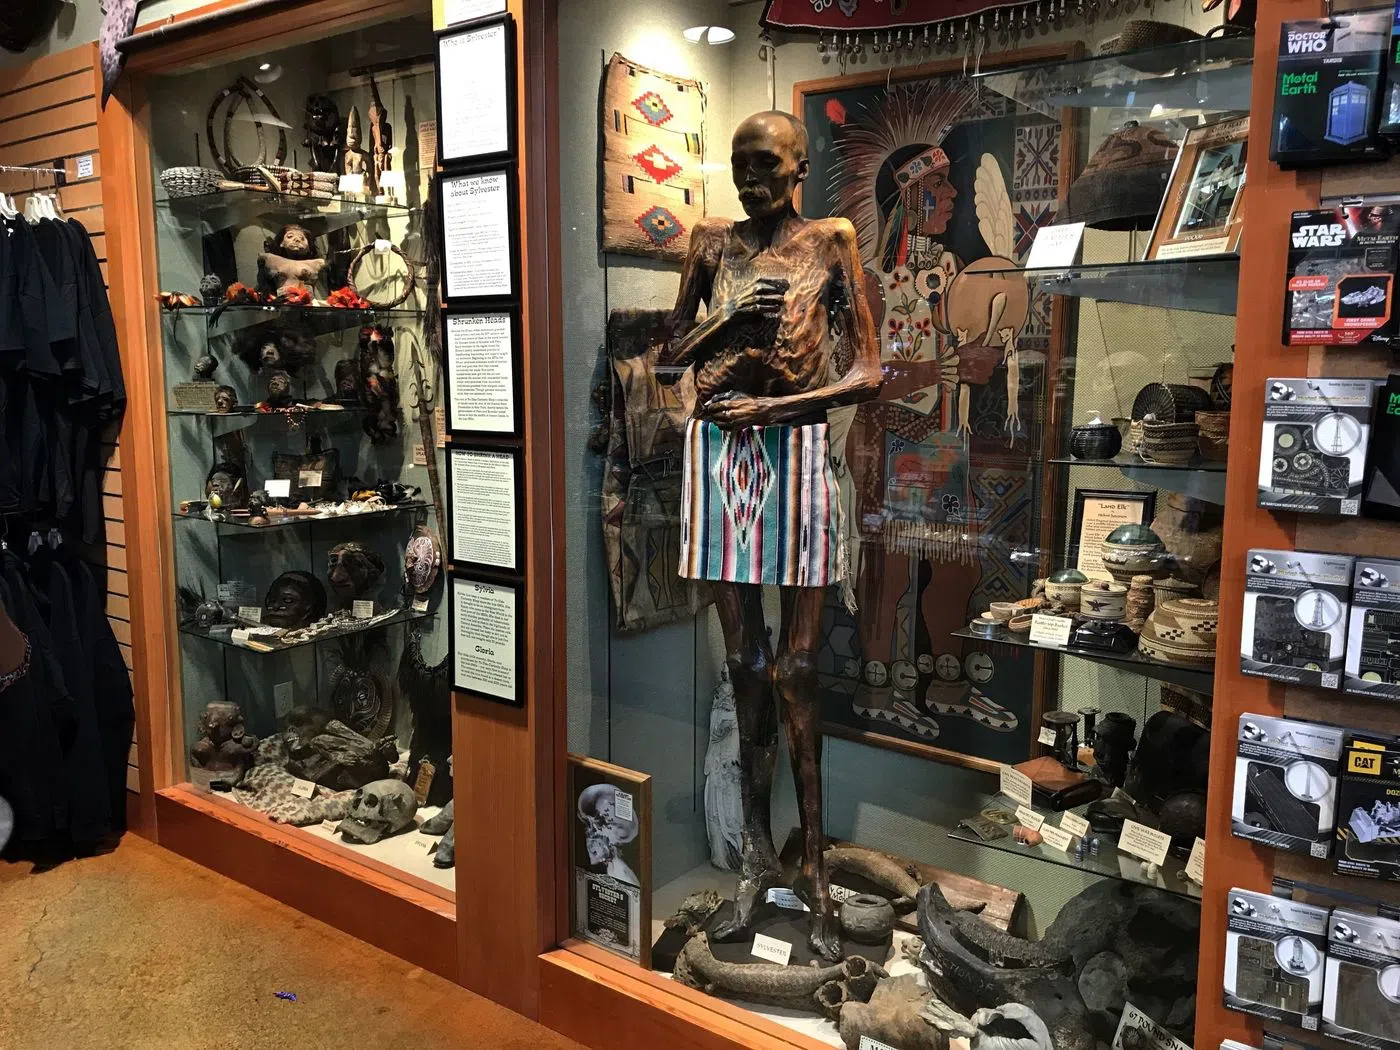 A mummy and other rare artifacts inside the shop